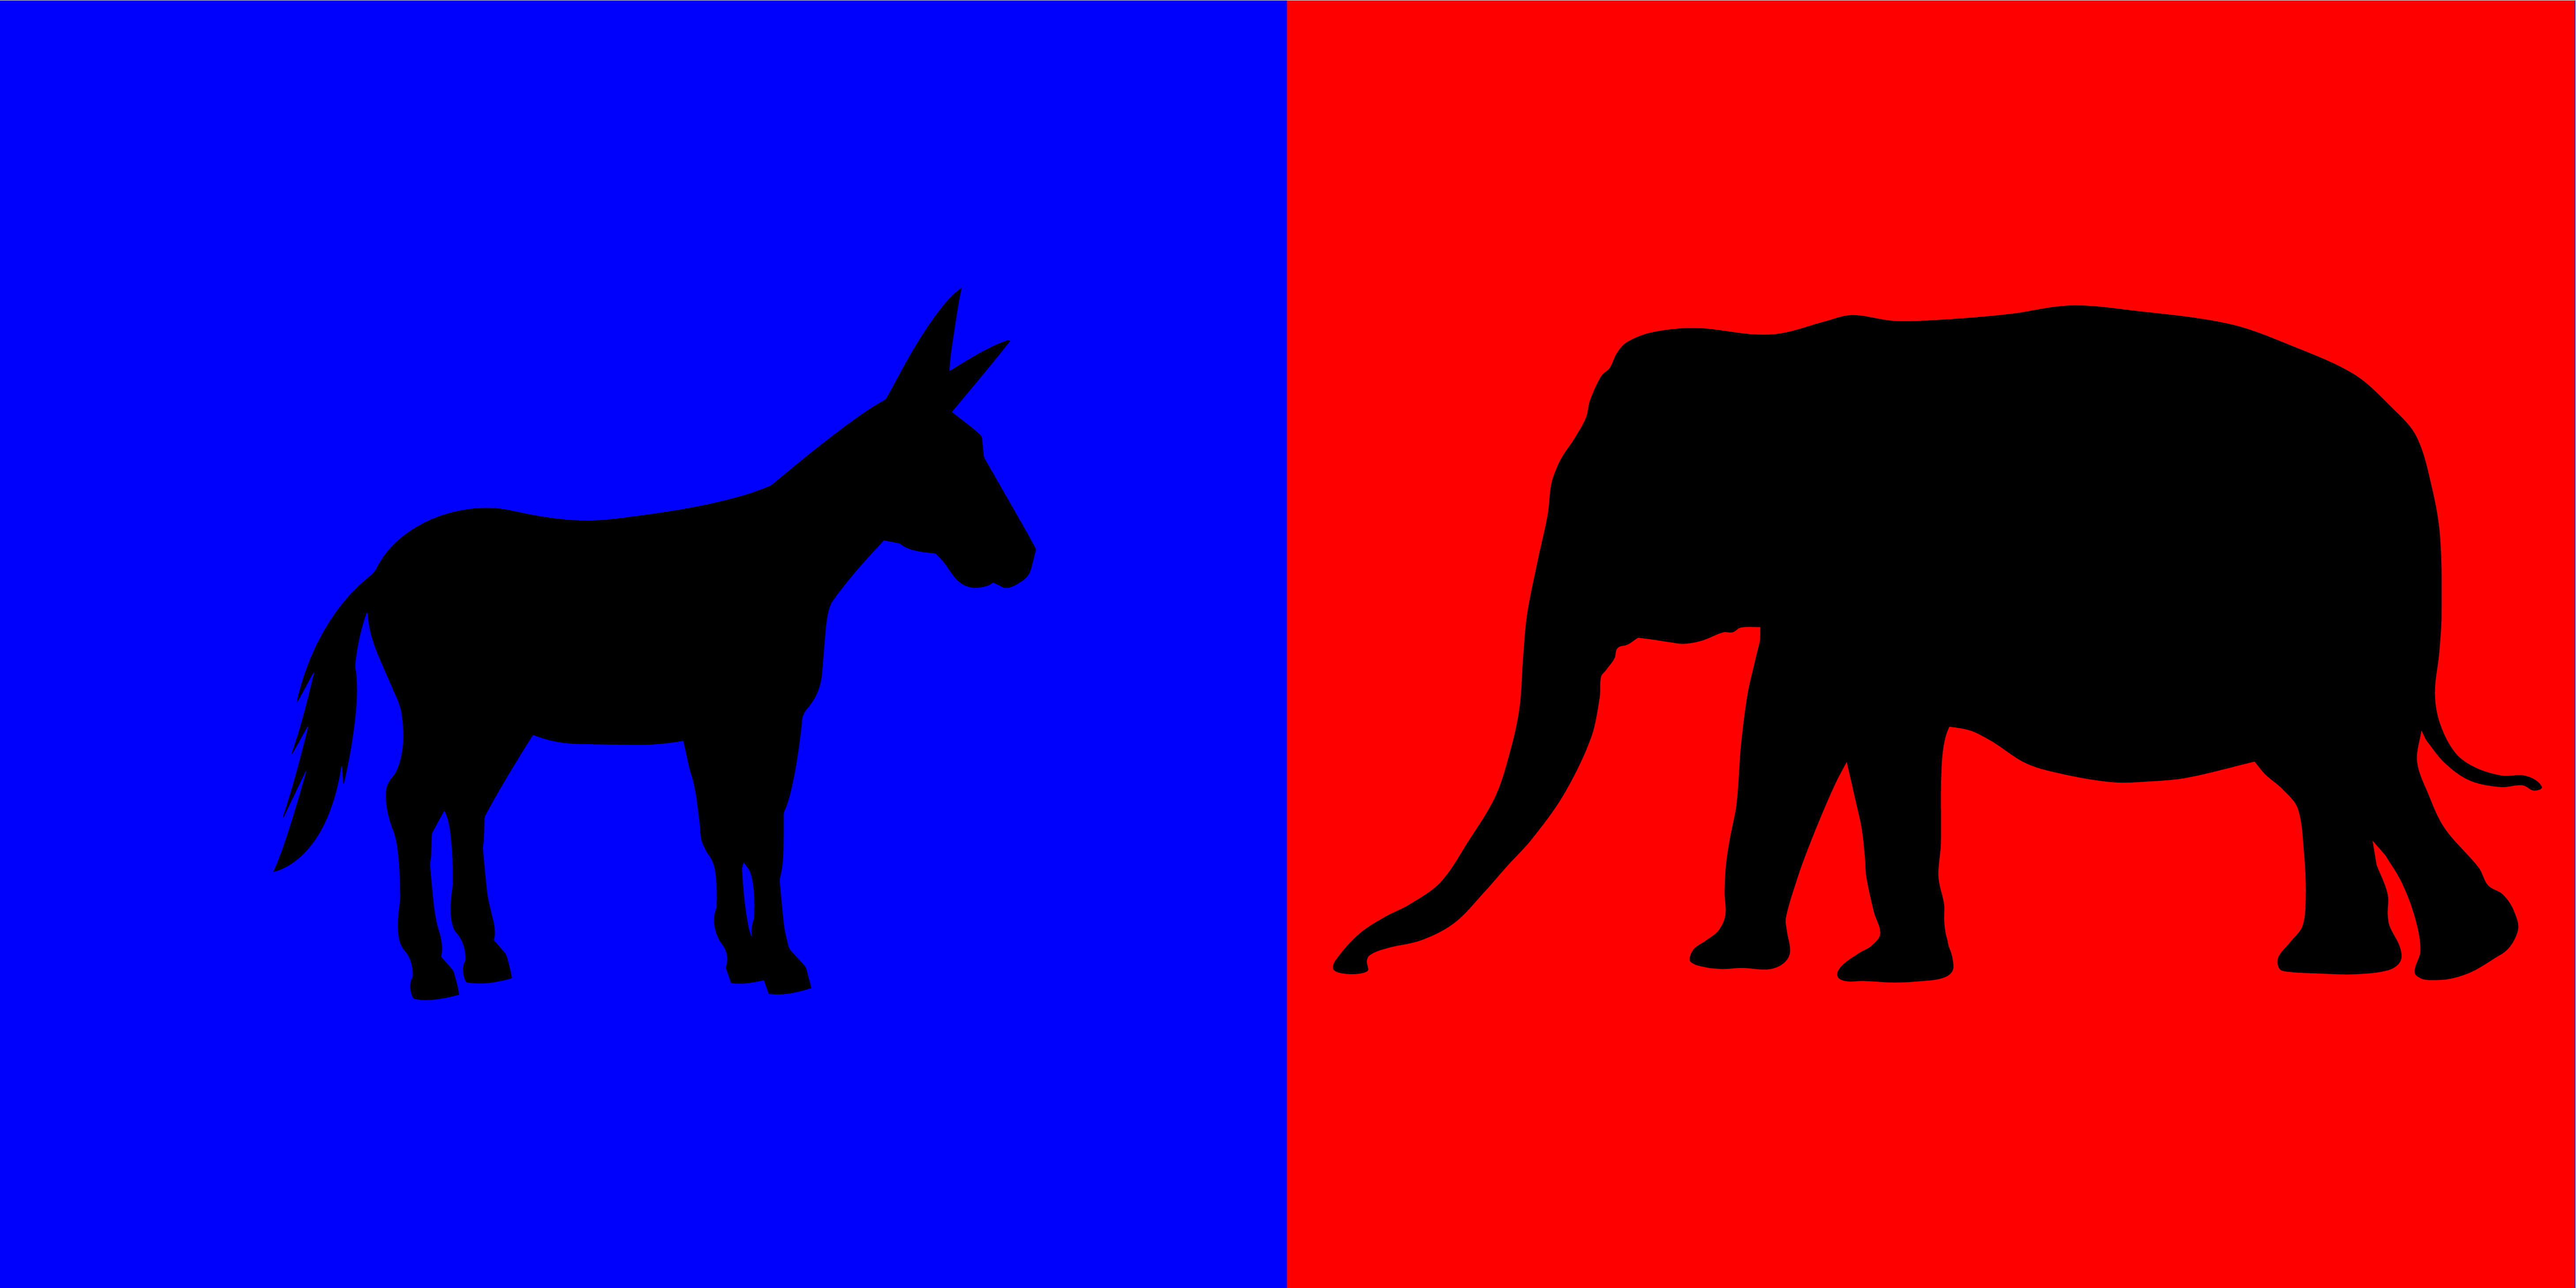 A donkey on the left amongst a blue background with an elephant on the right amongst a red background to emphasize America's political division.